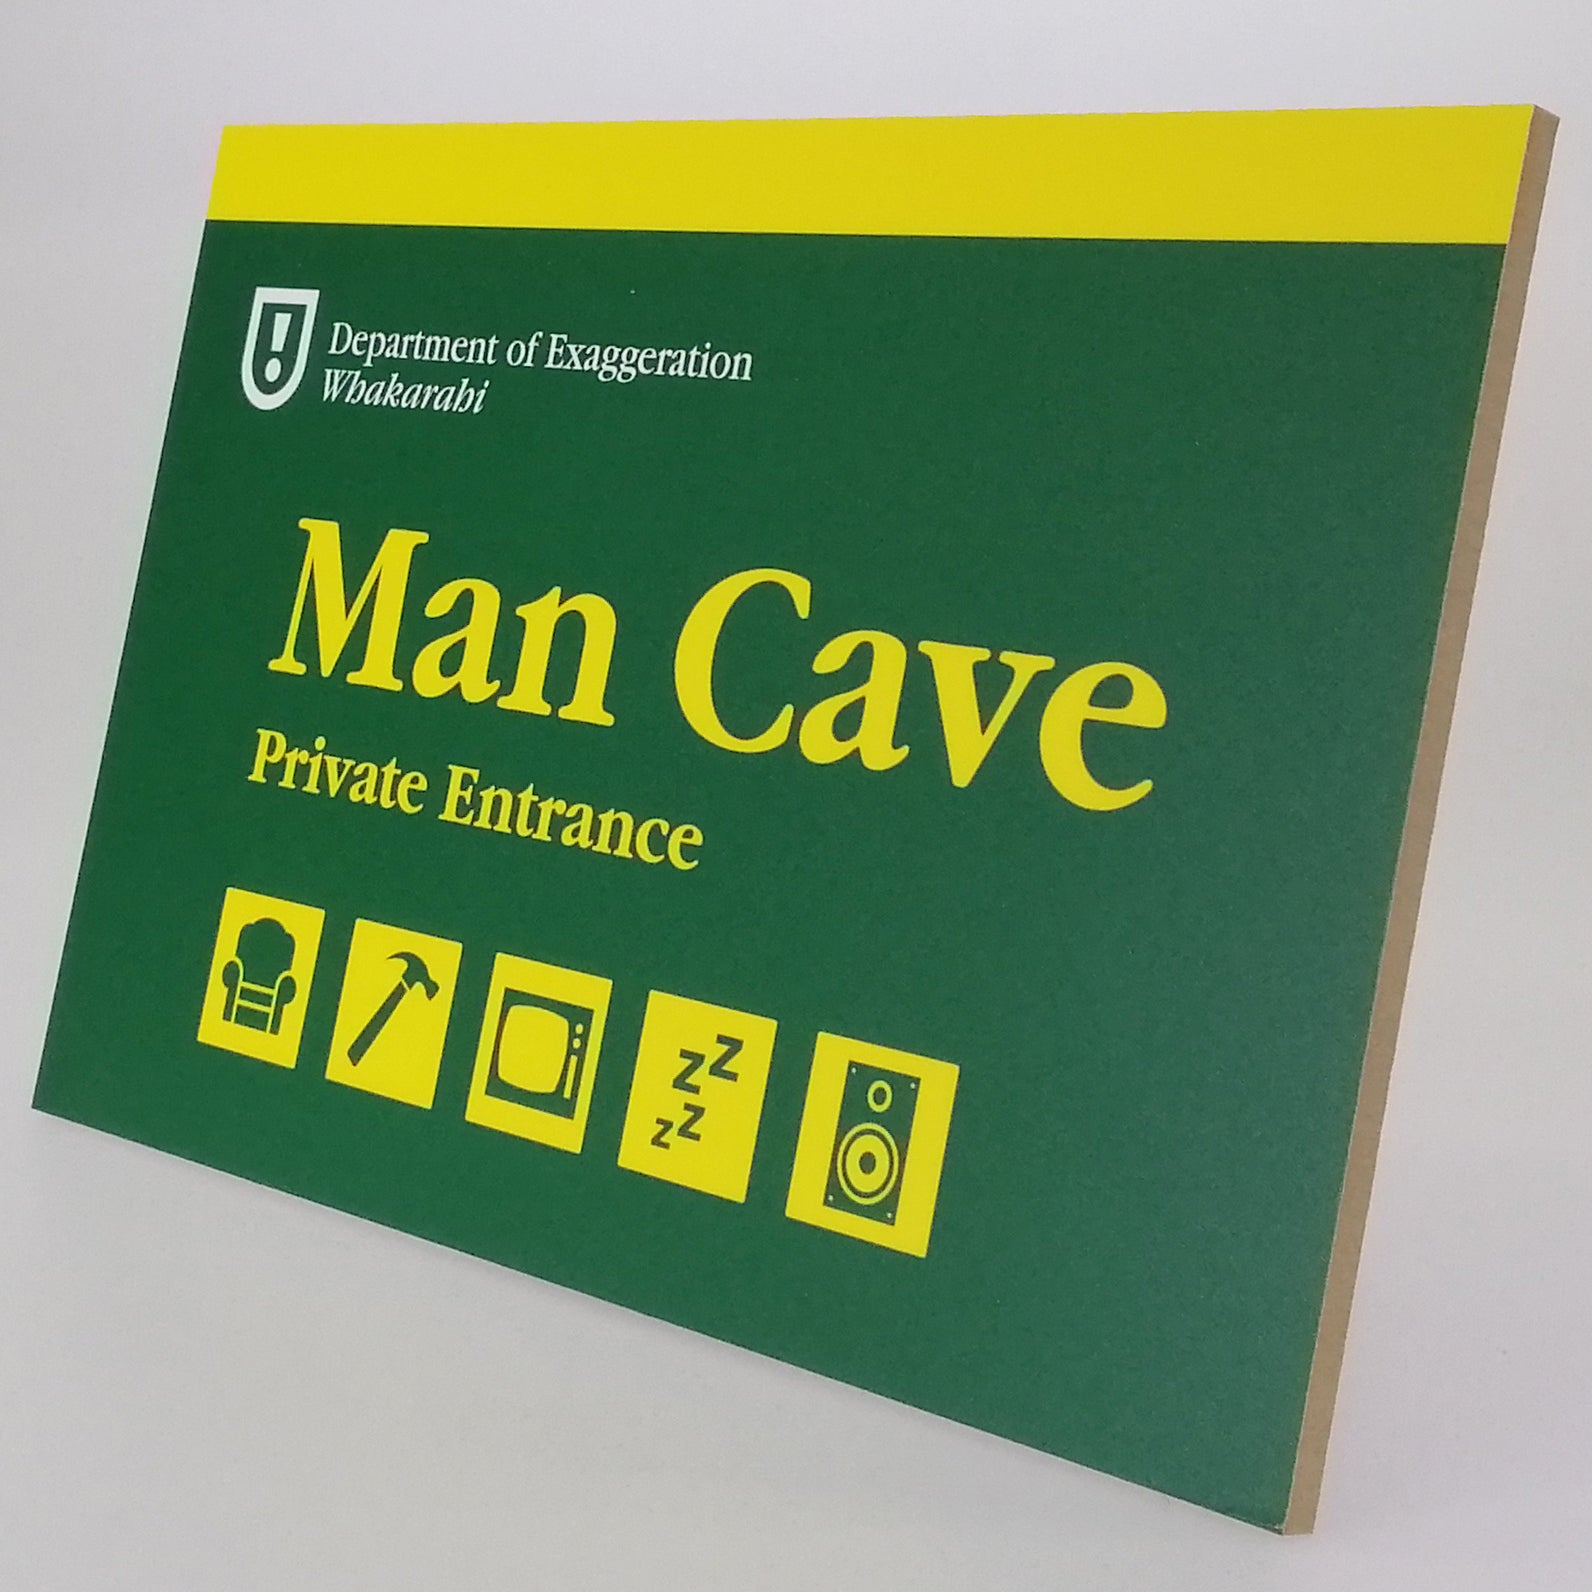 Department of Exaggeration - Man Cave Entrance Sign